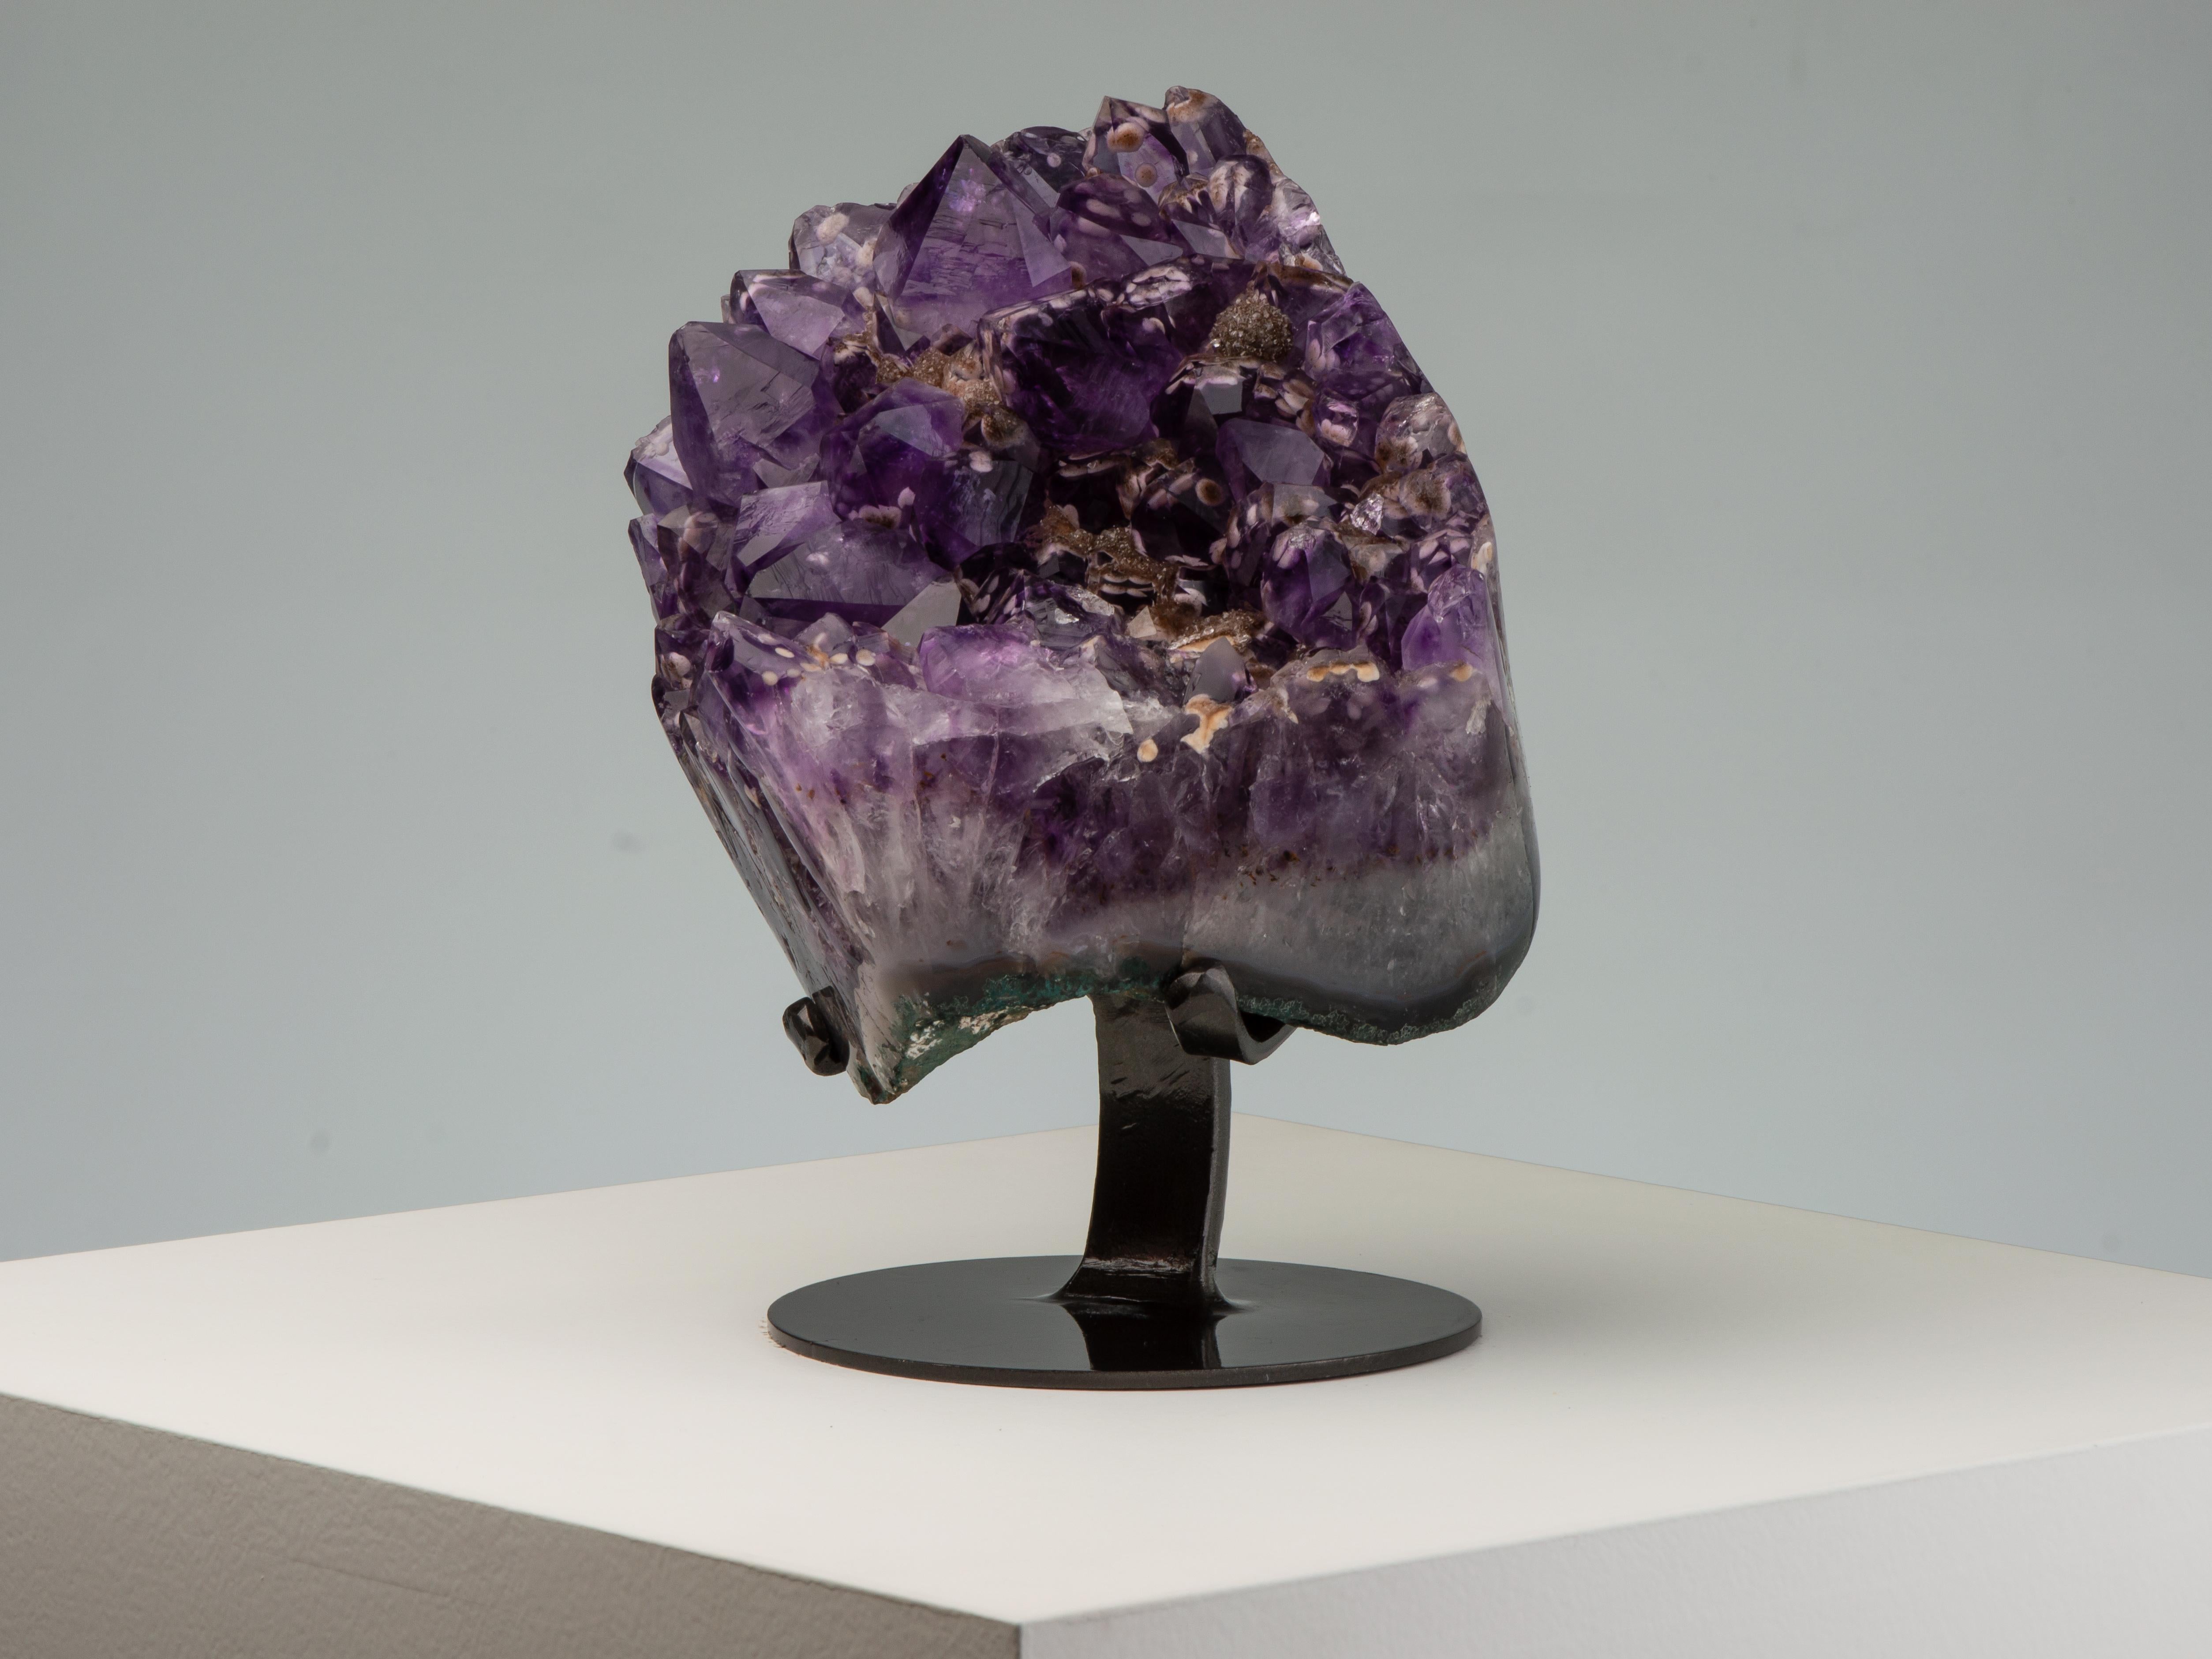 18th Century and Earlier Deep Purple Amethyst with Goethite Inclusions Within For Sale